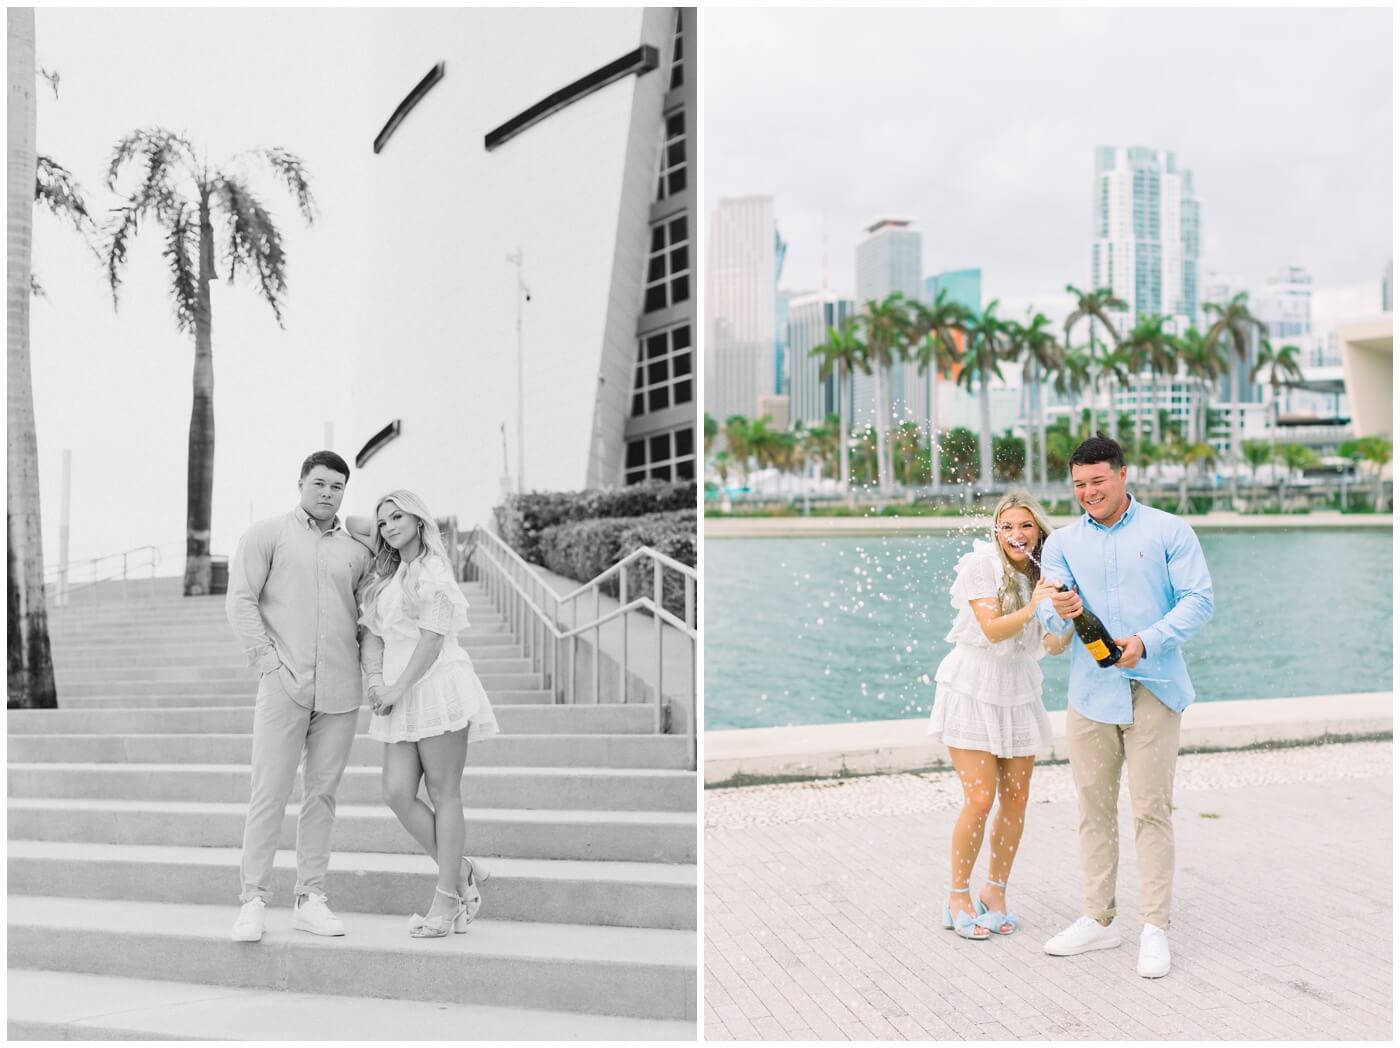 Wedding photographer in Miami | Couple smiles together in downtown Miami